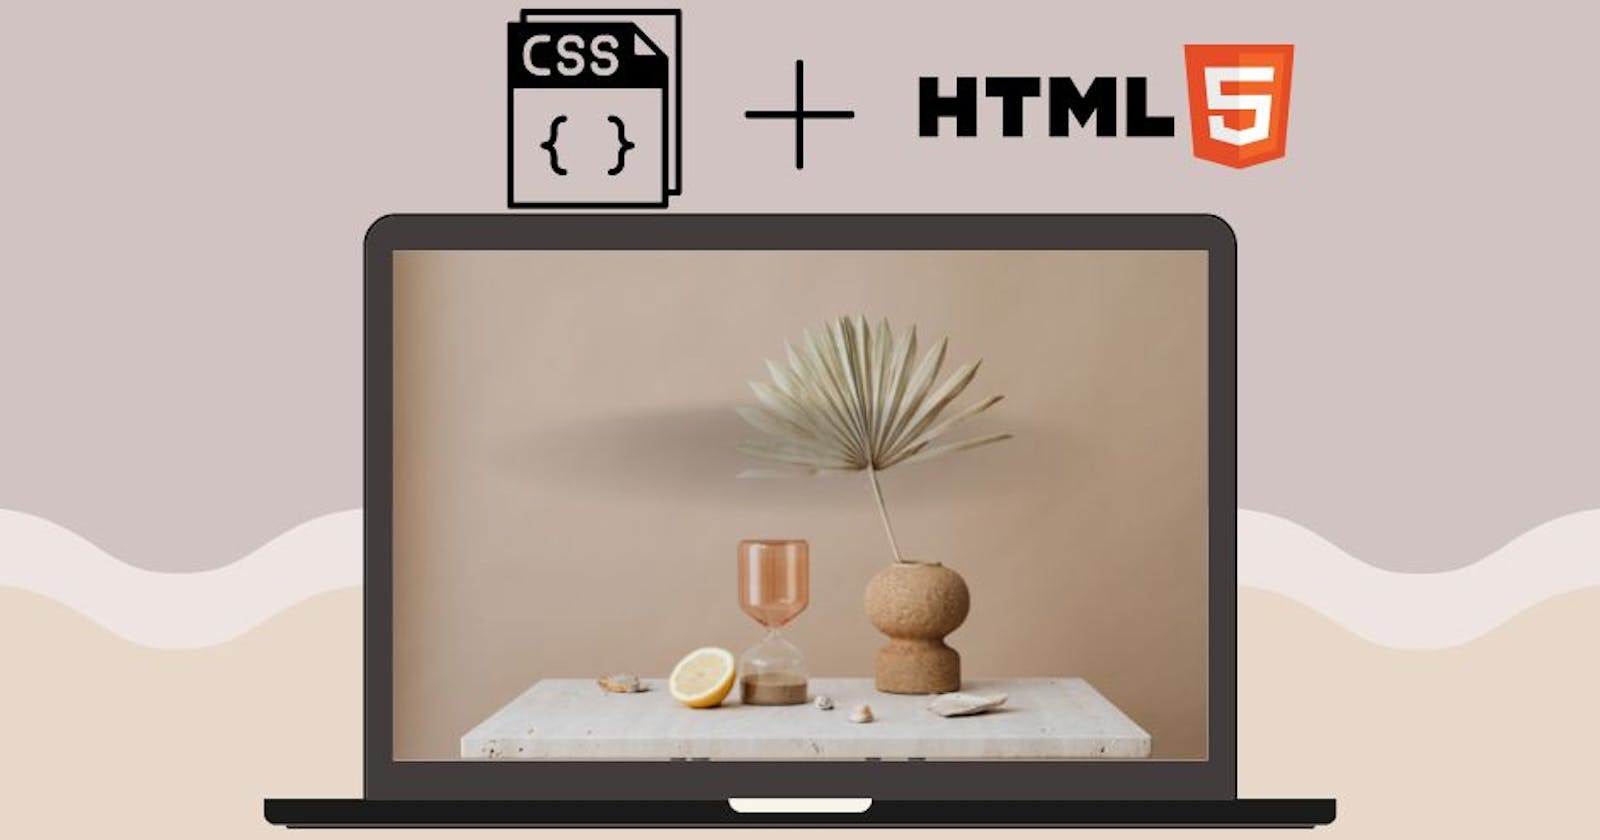 Learning CSS & HTML